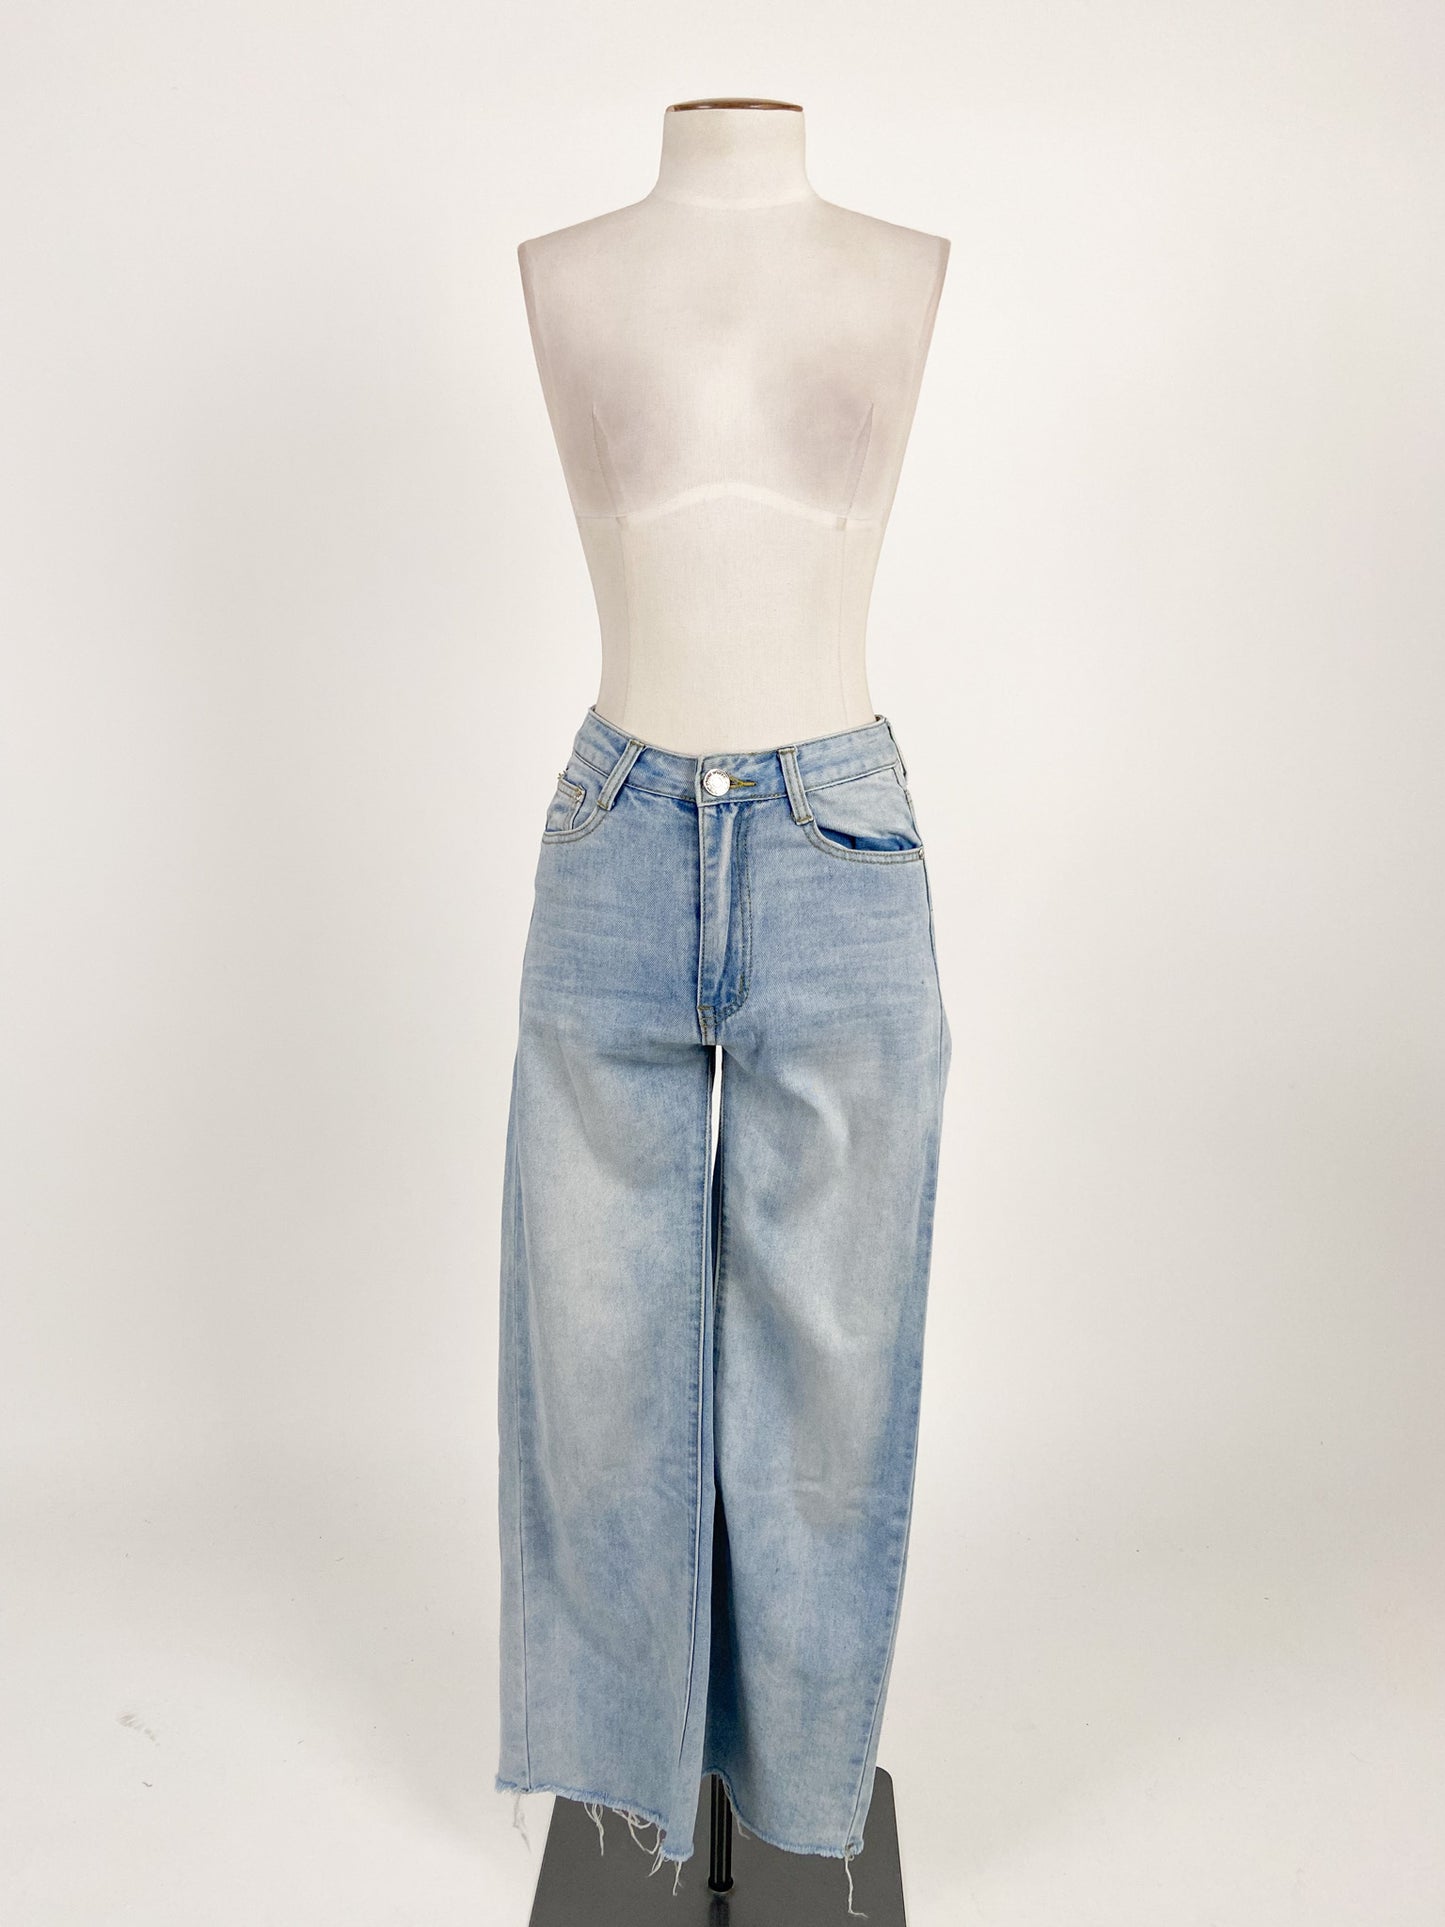 Polly | Blue Jeans | Size 6